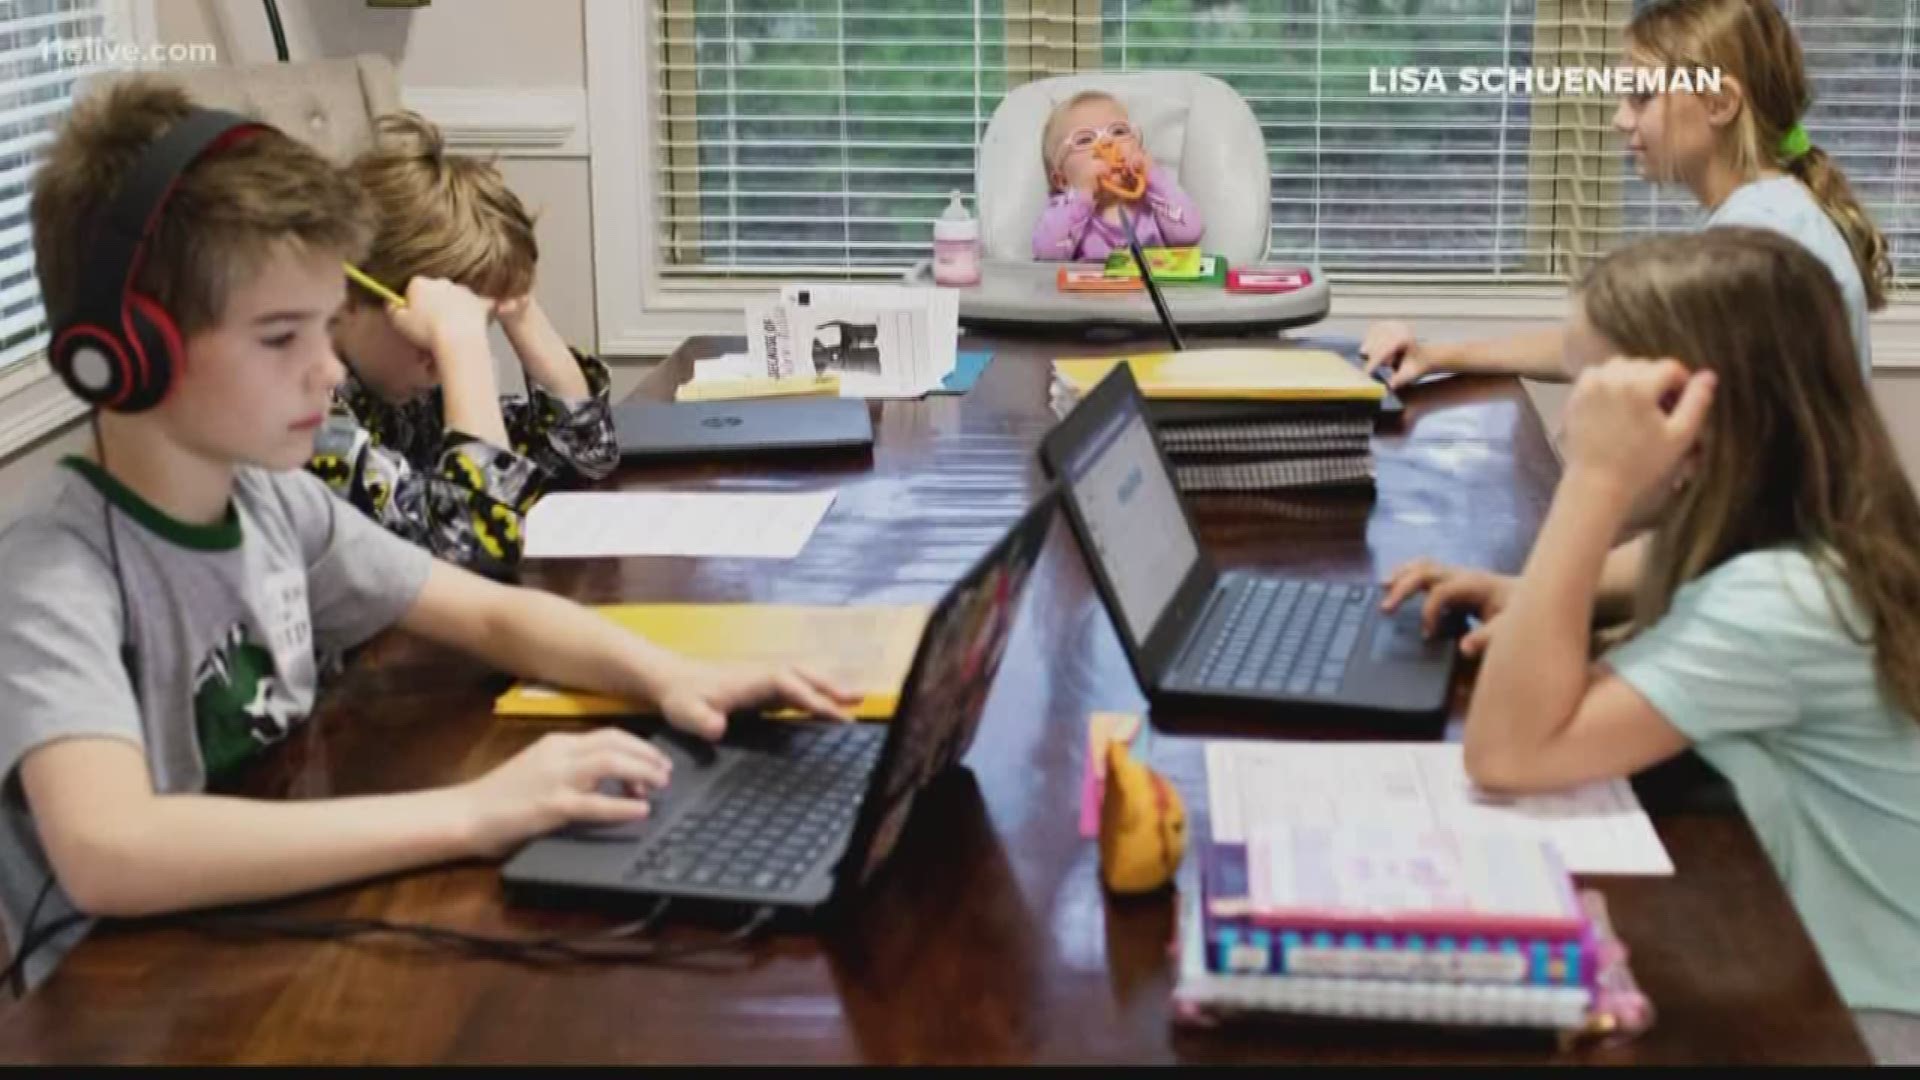 Parents are finding a way to be home with their kids while juggling their own work.